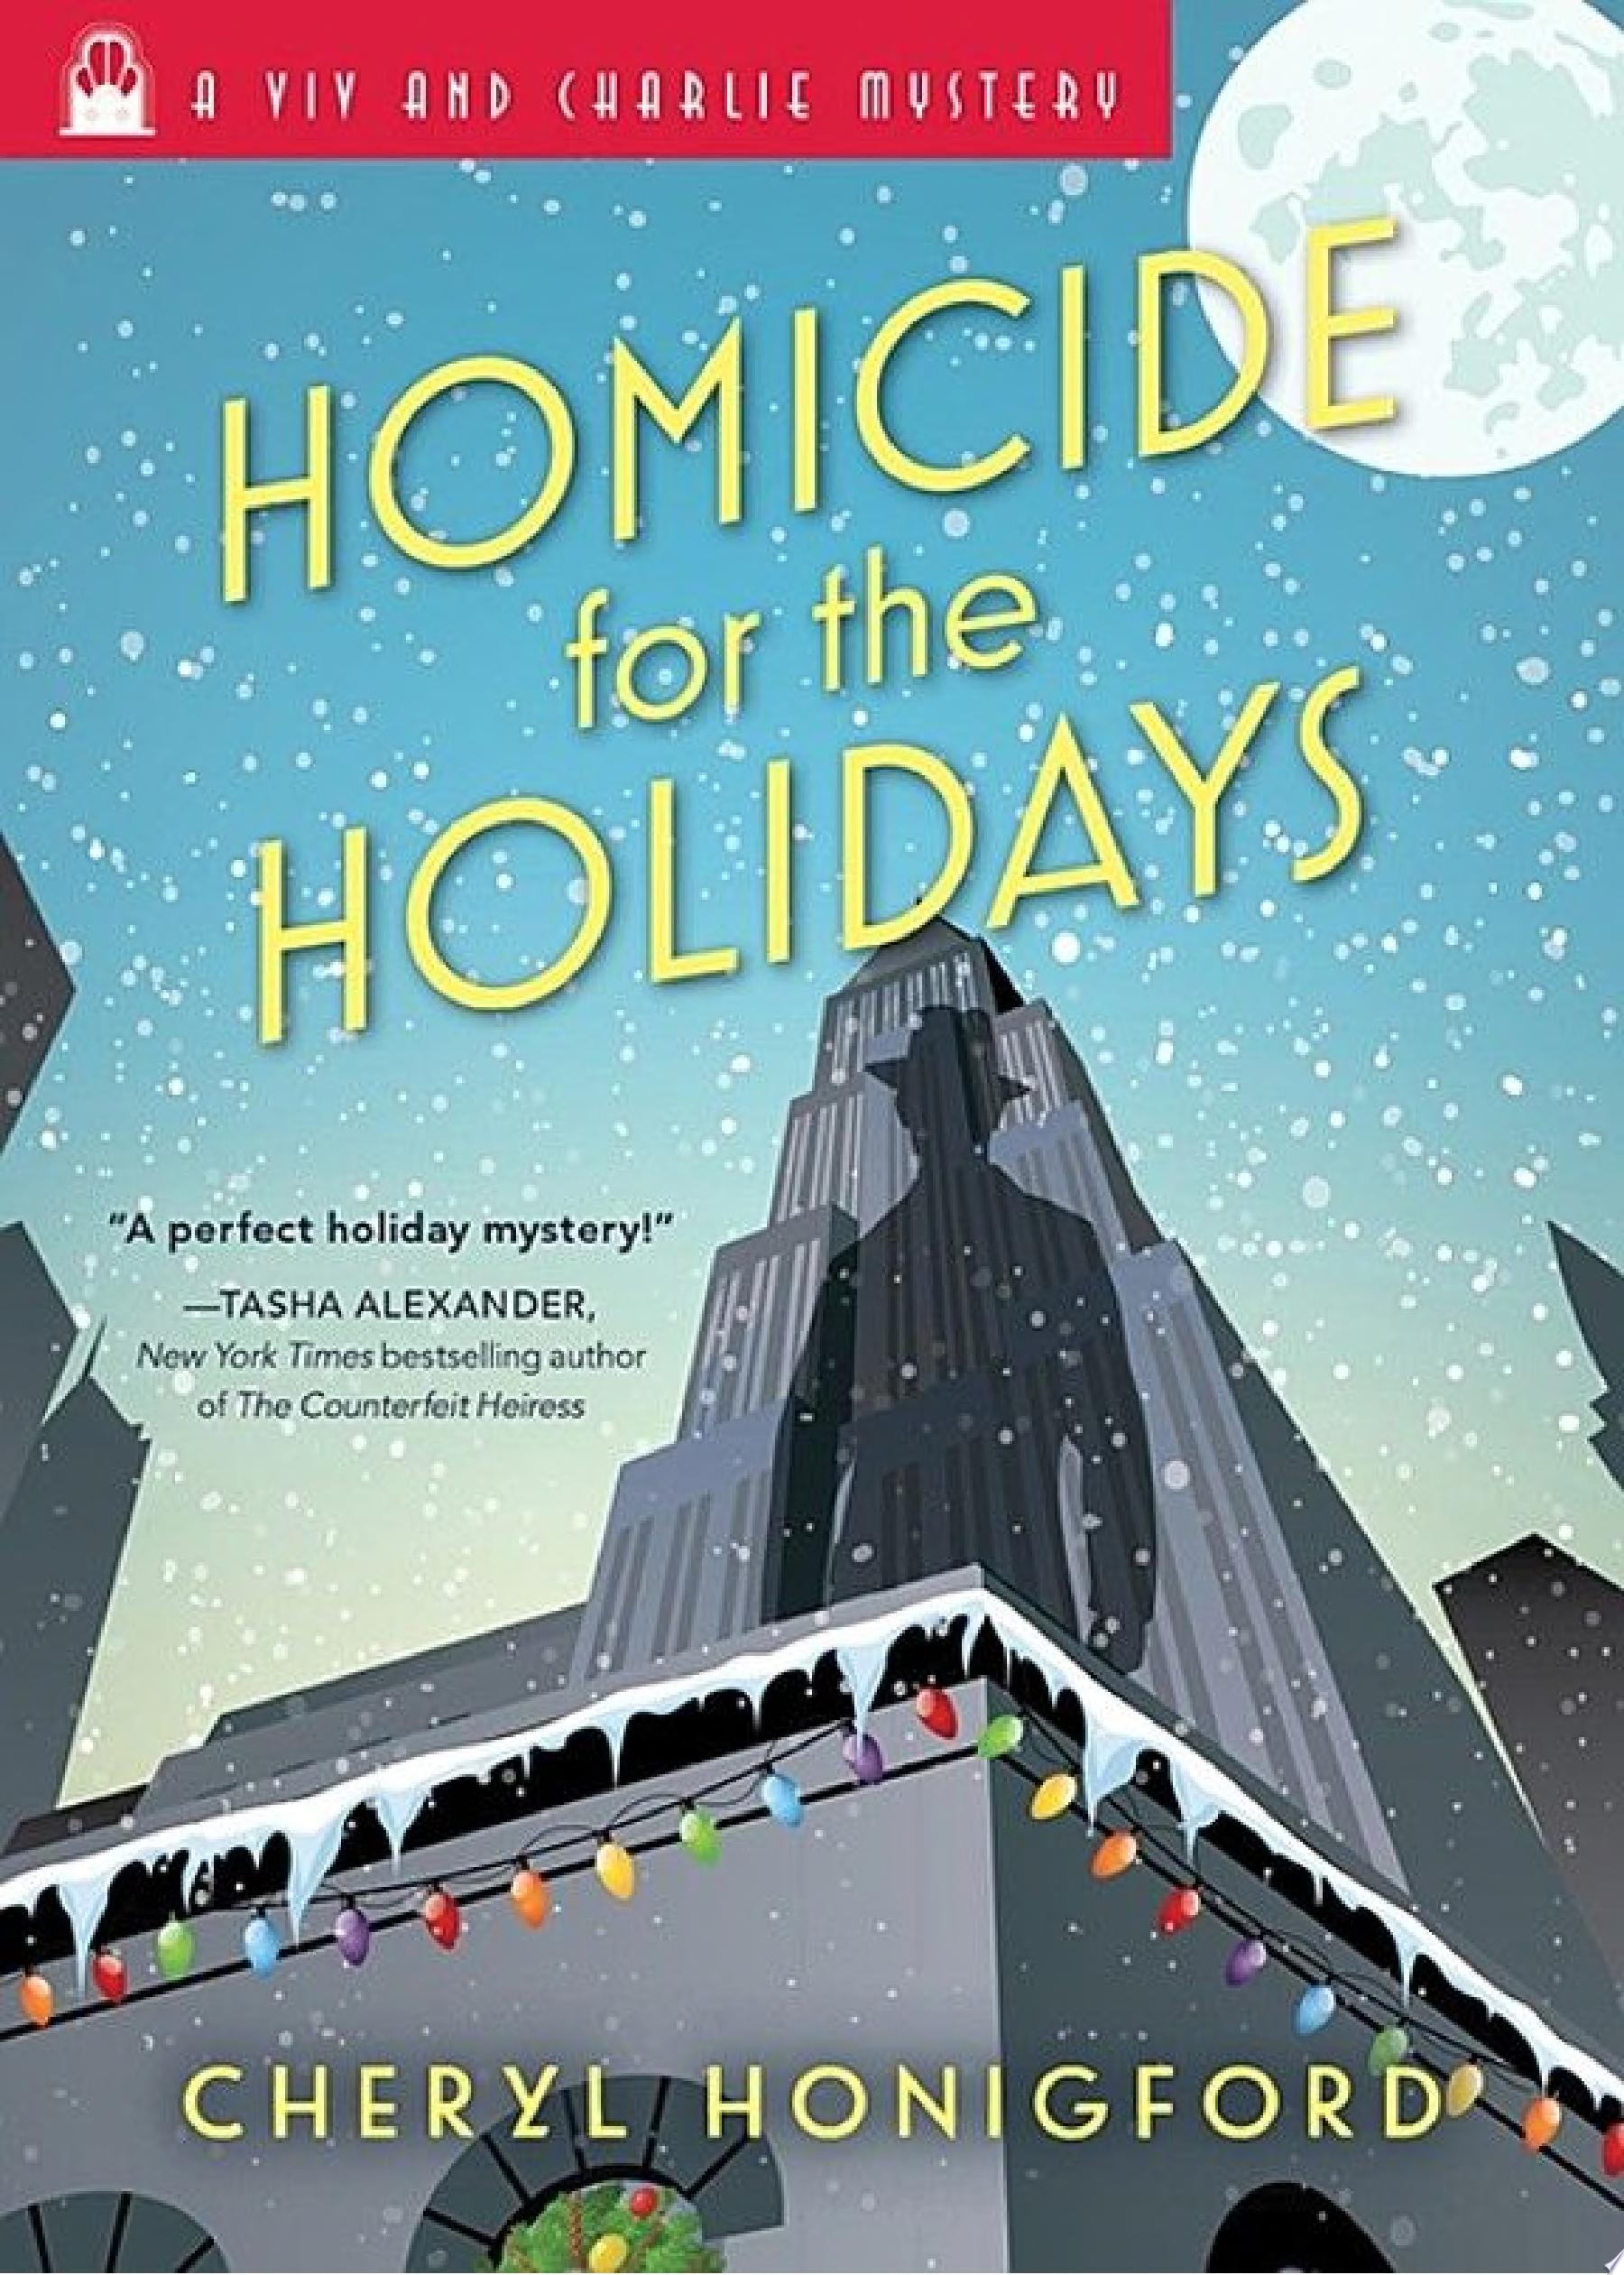 Image for "Homicide for the Holidays"